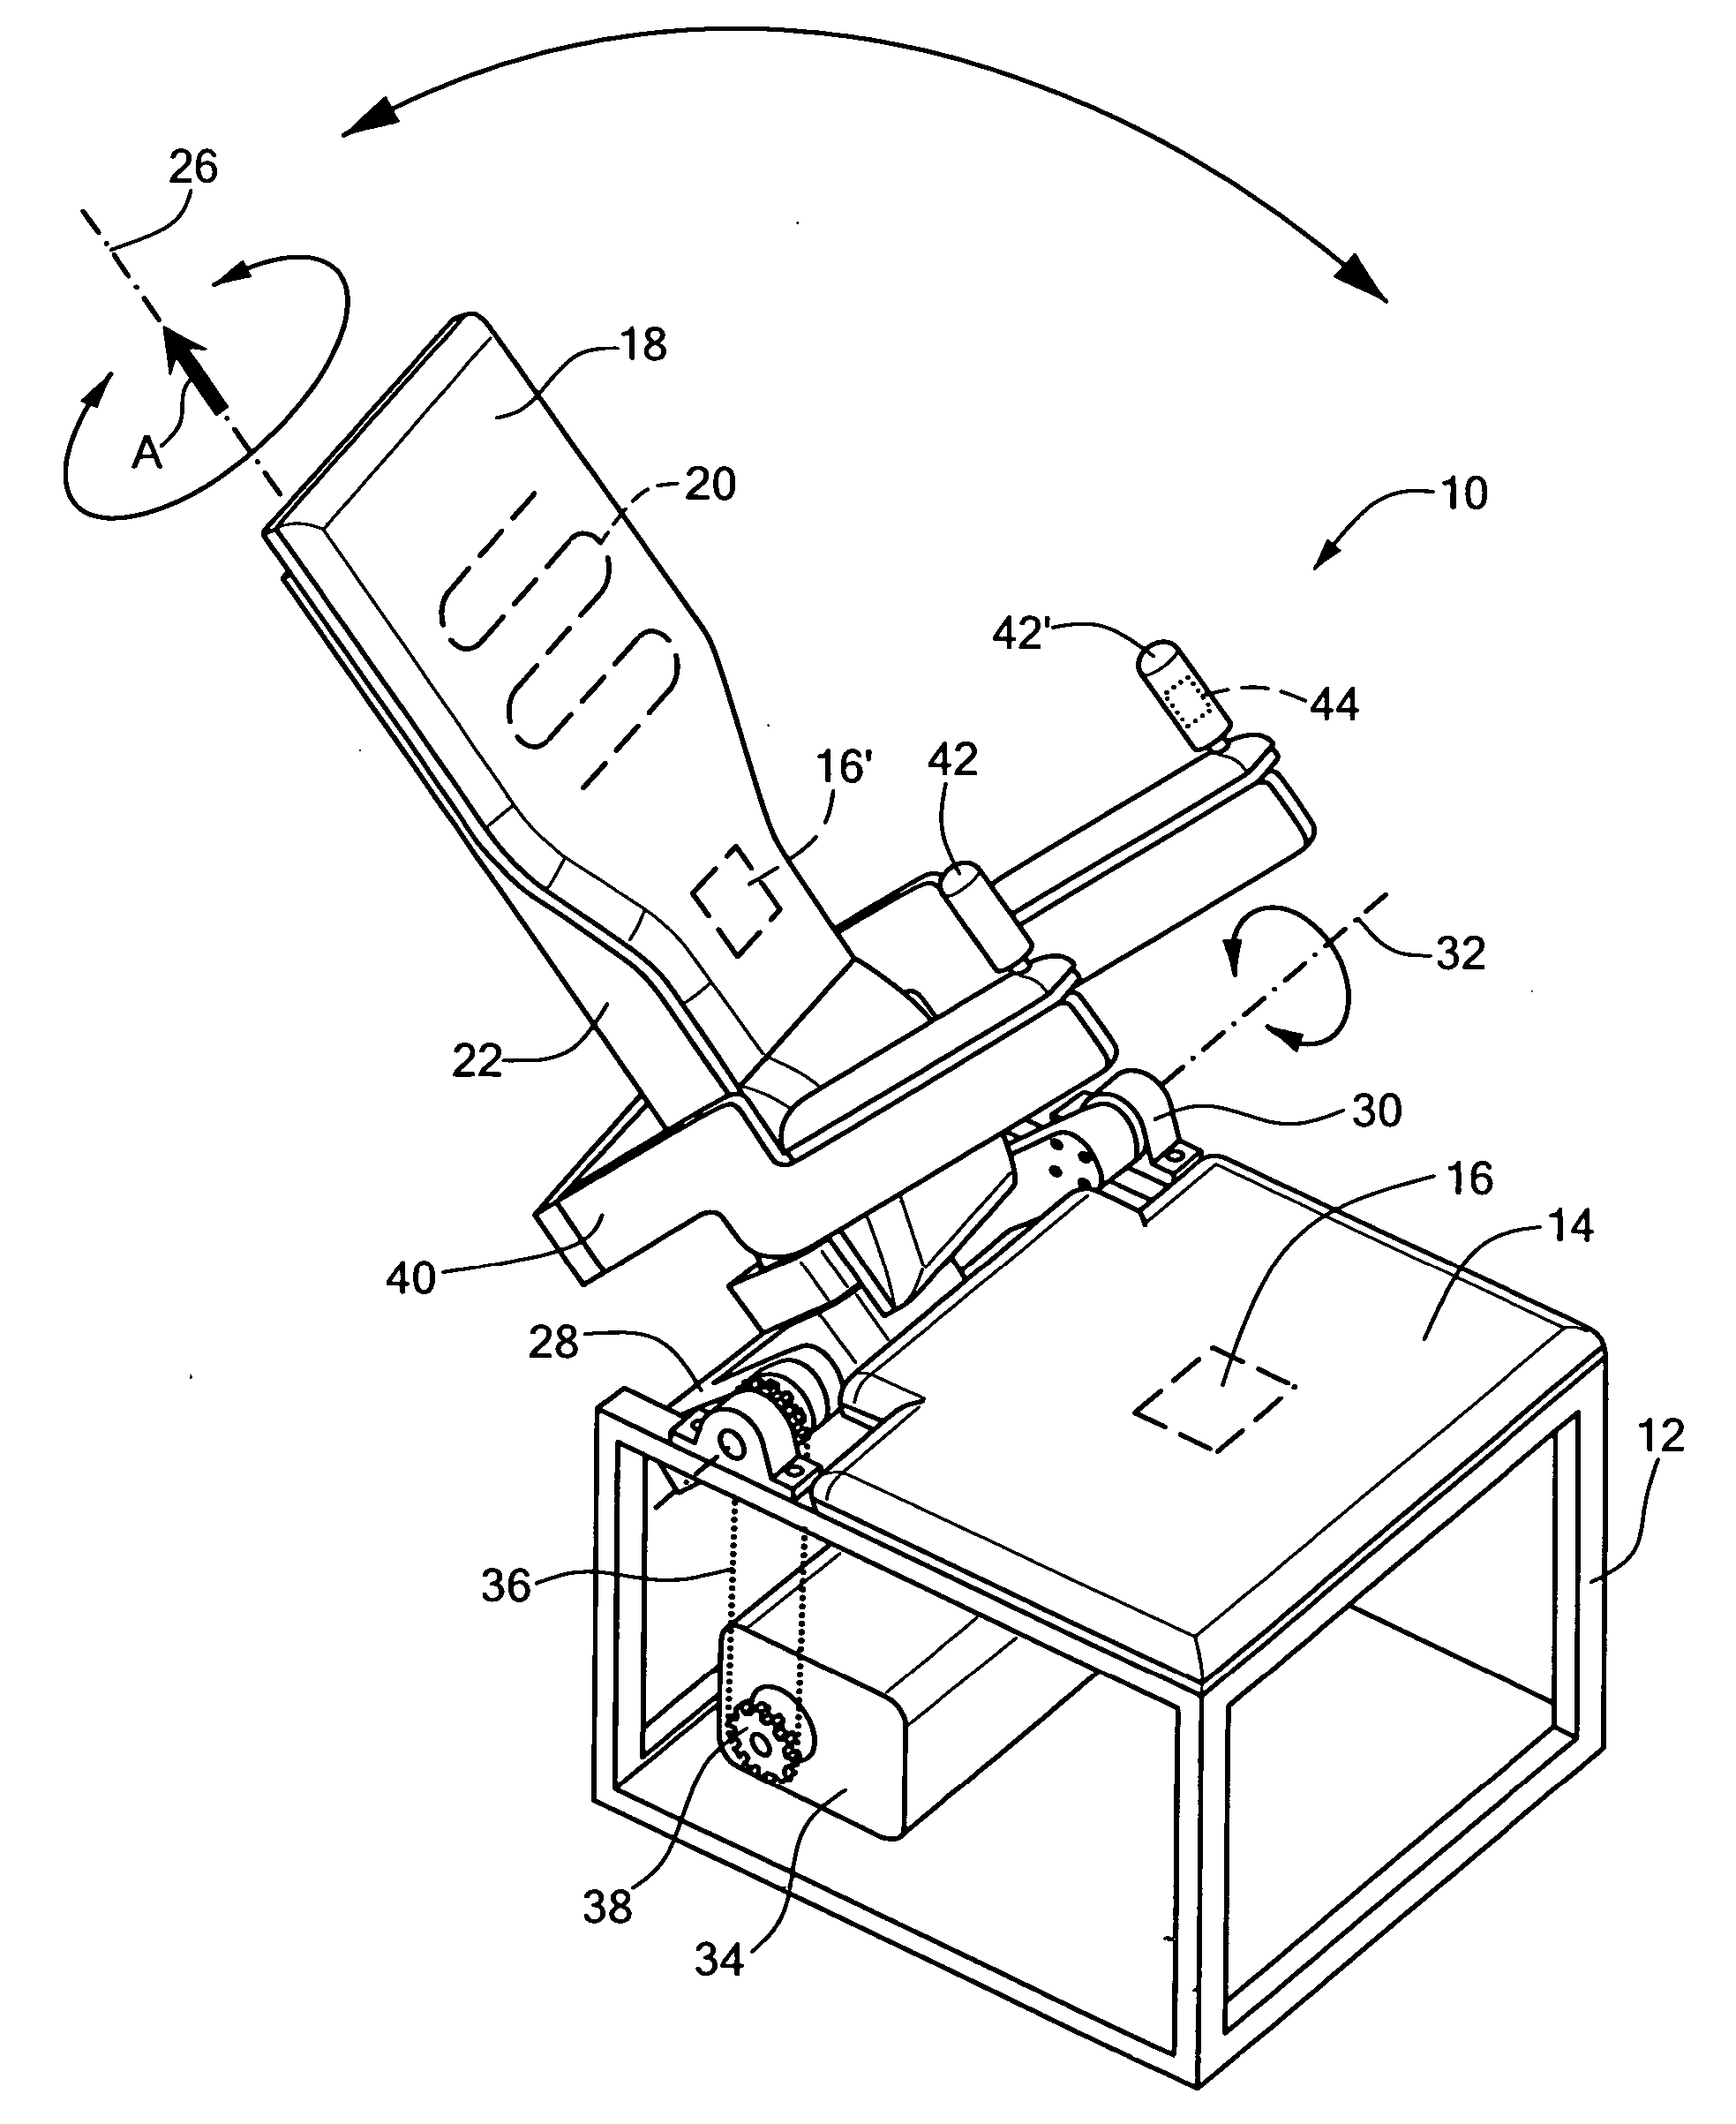 Passive motion body articulating apparatus and method